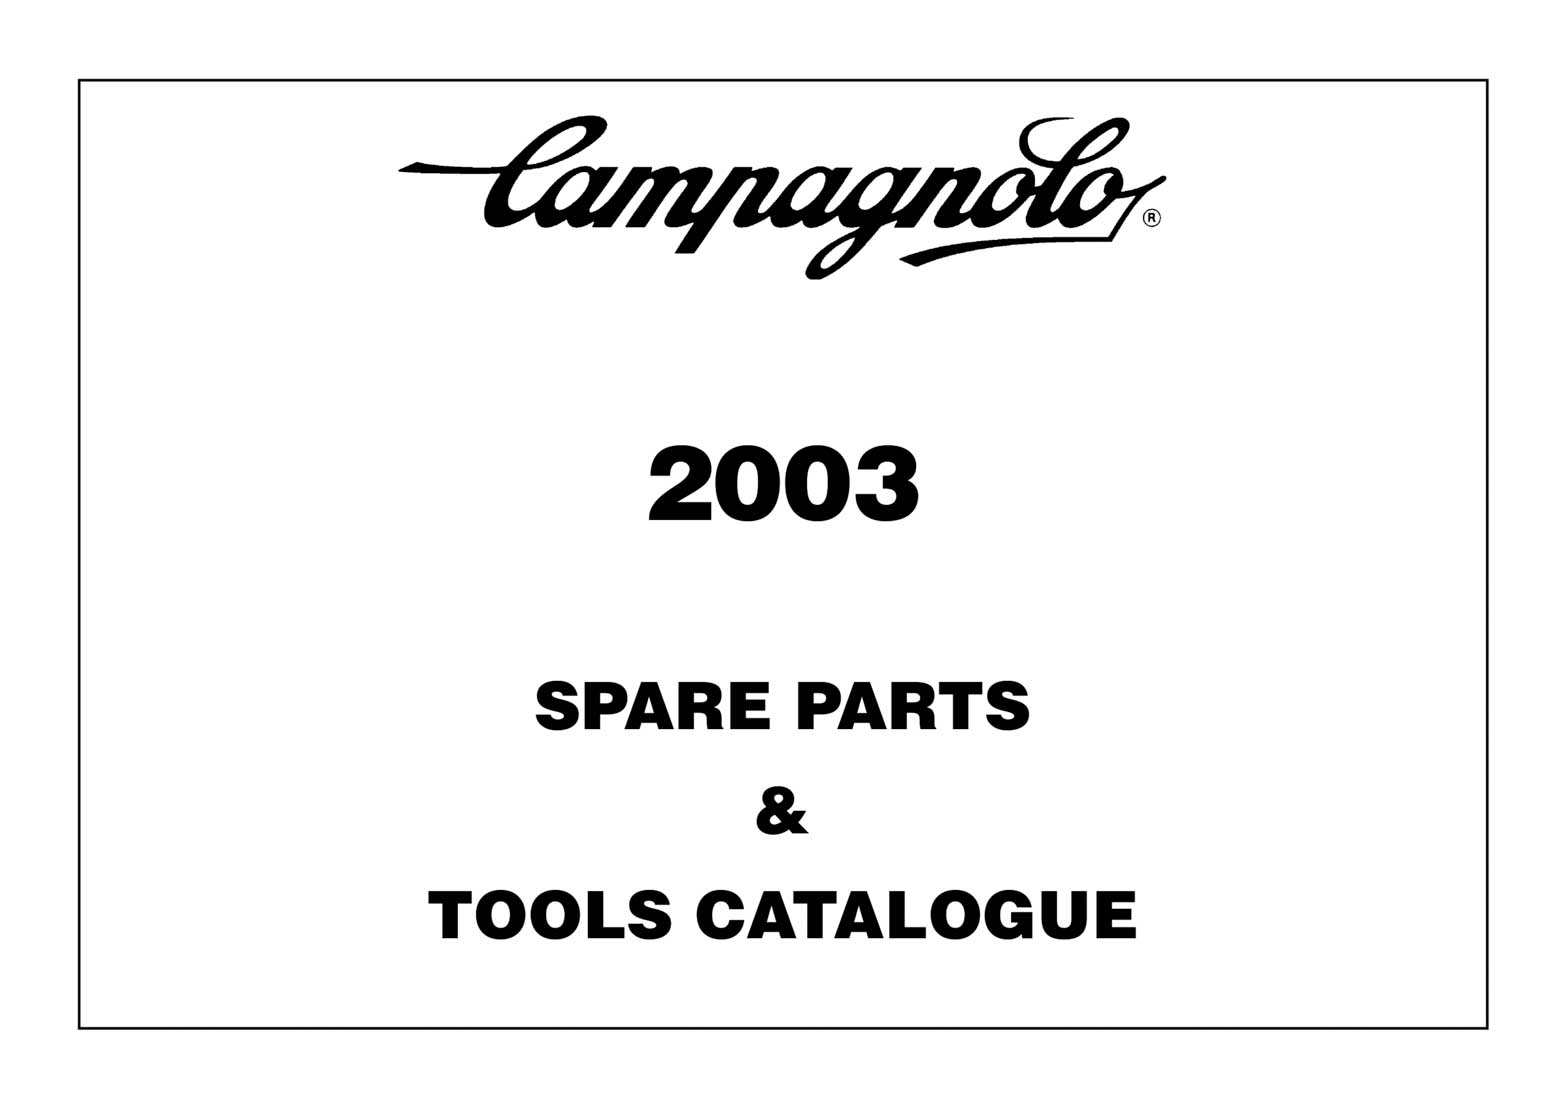 Campagnolo - 2003 Spare Parts & Tools Catalogue front cover main image